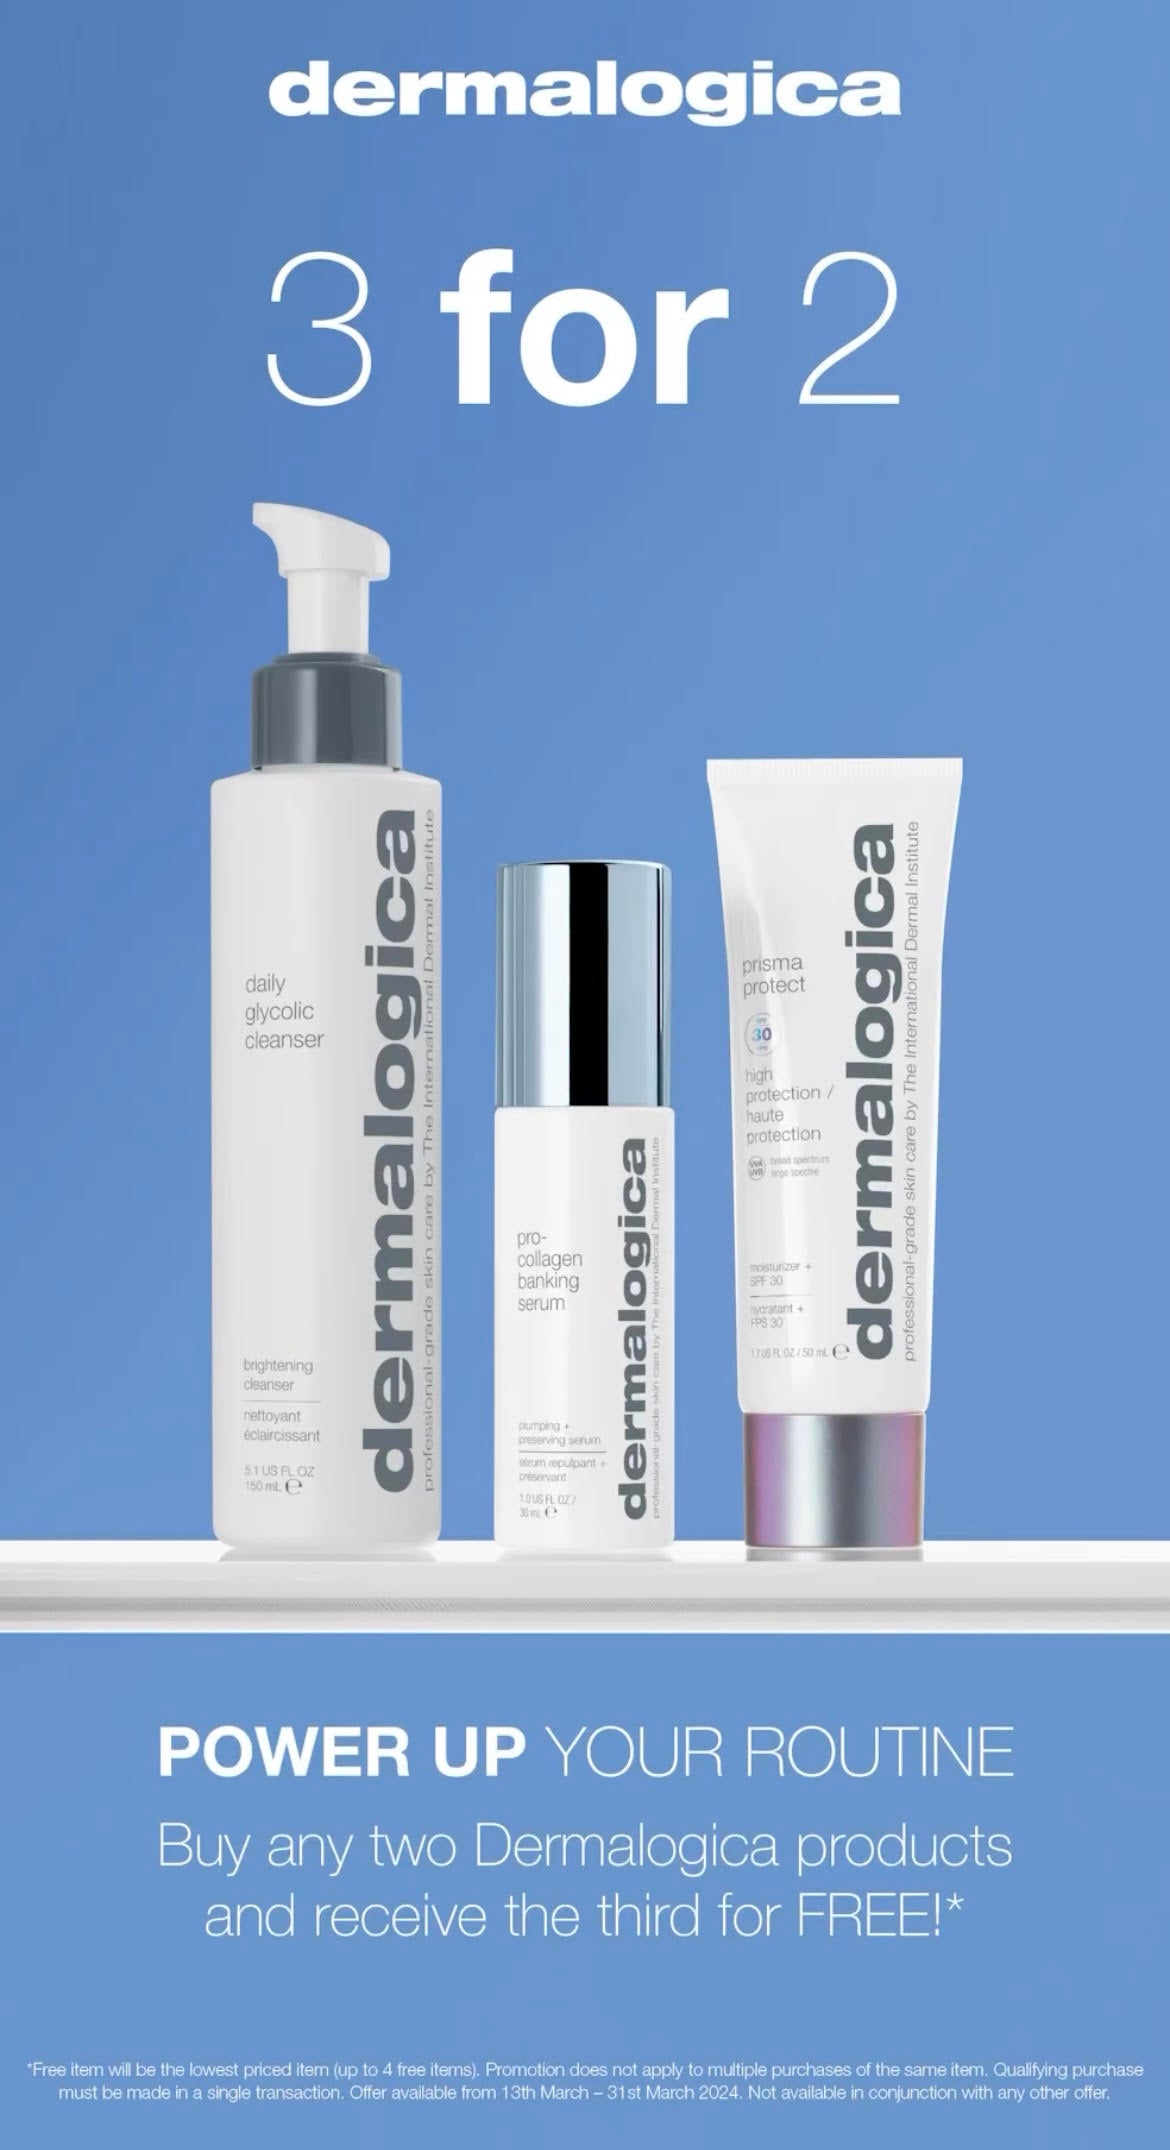 Buy 2 Get a 3rd FREE! -  Dermalogica -*conditions apply